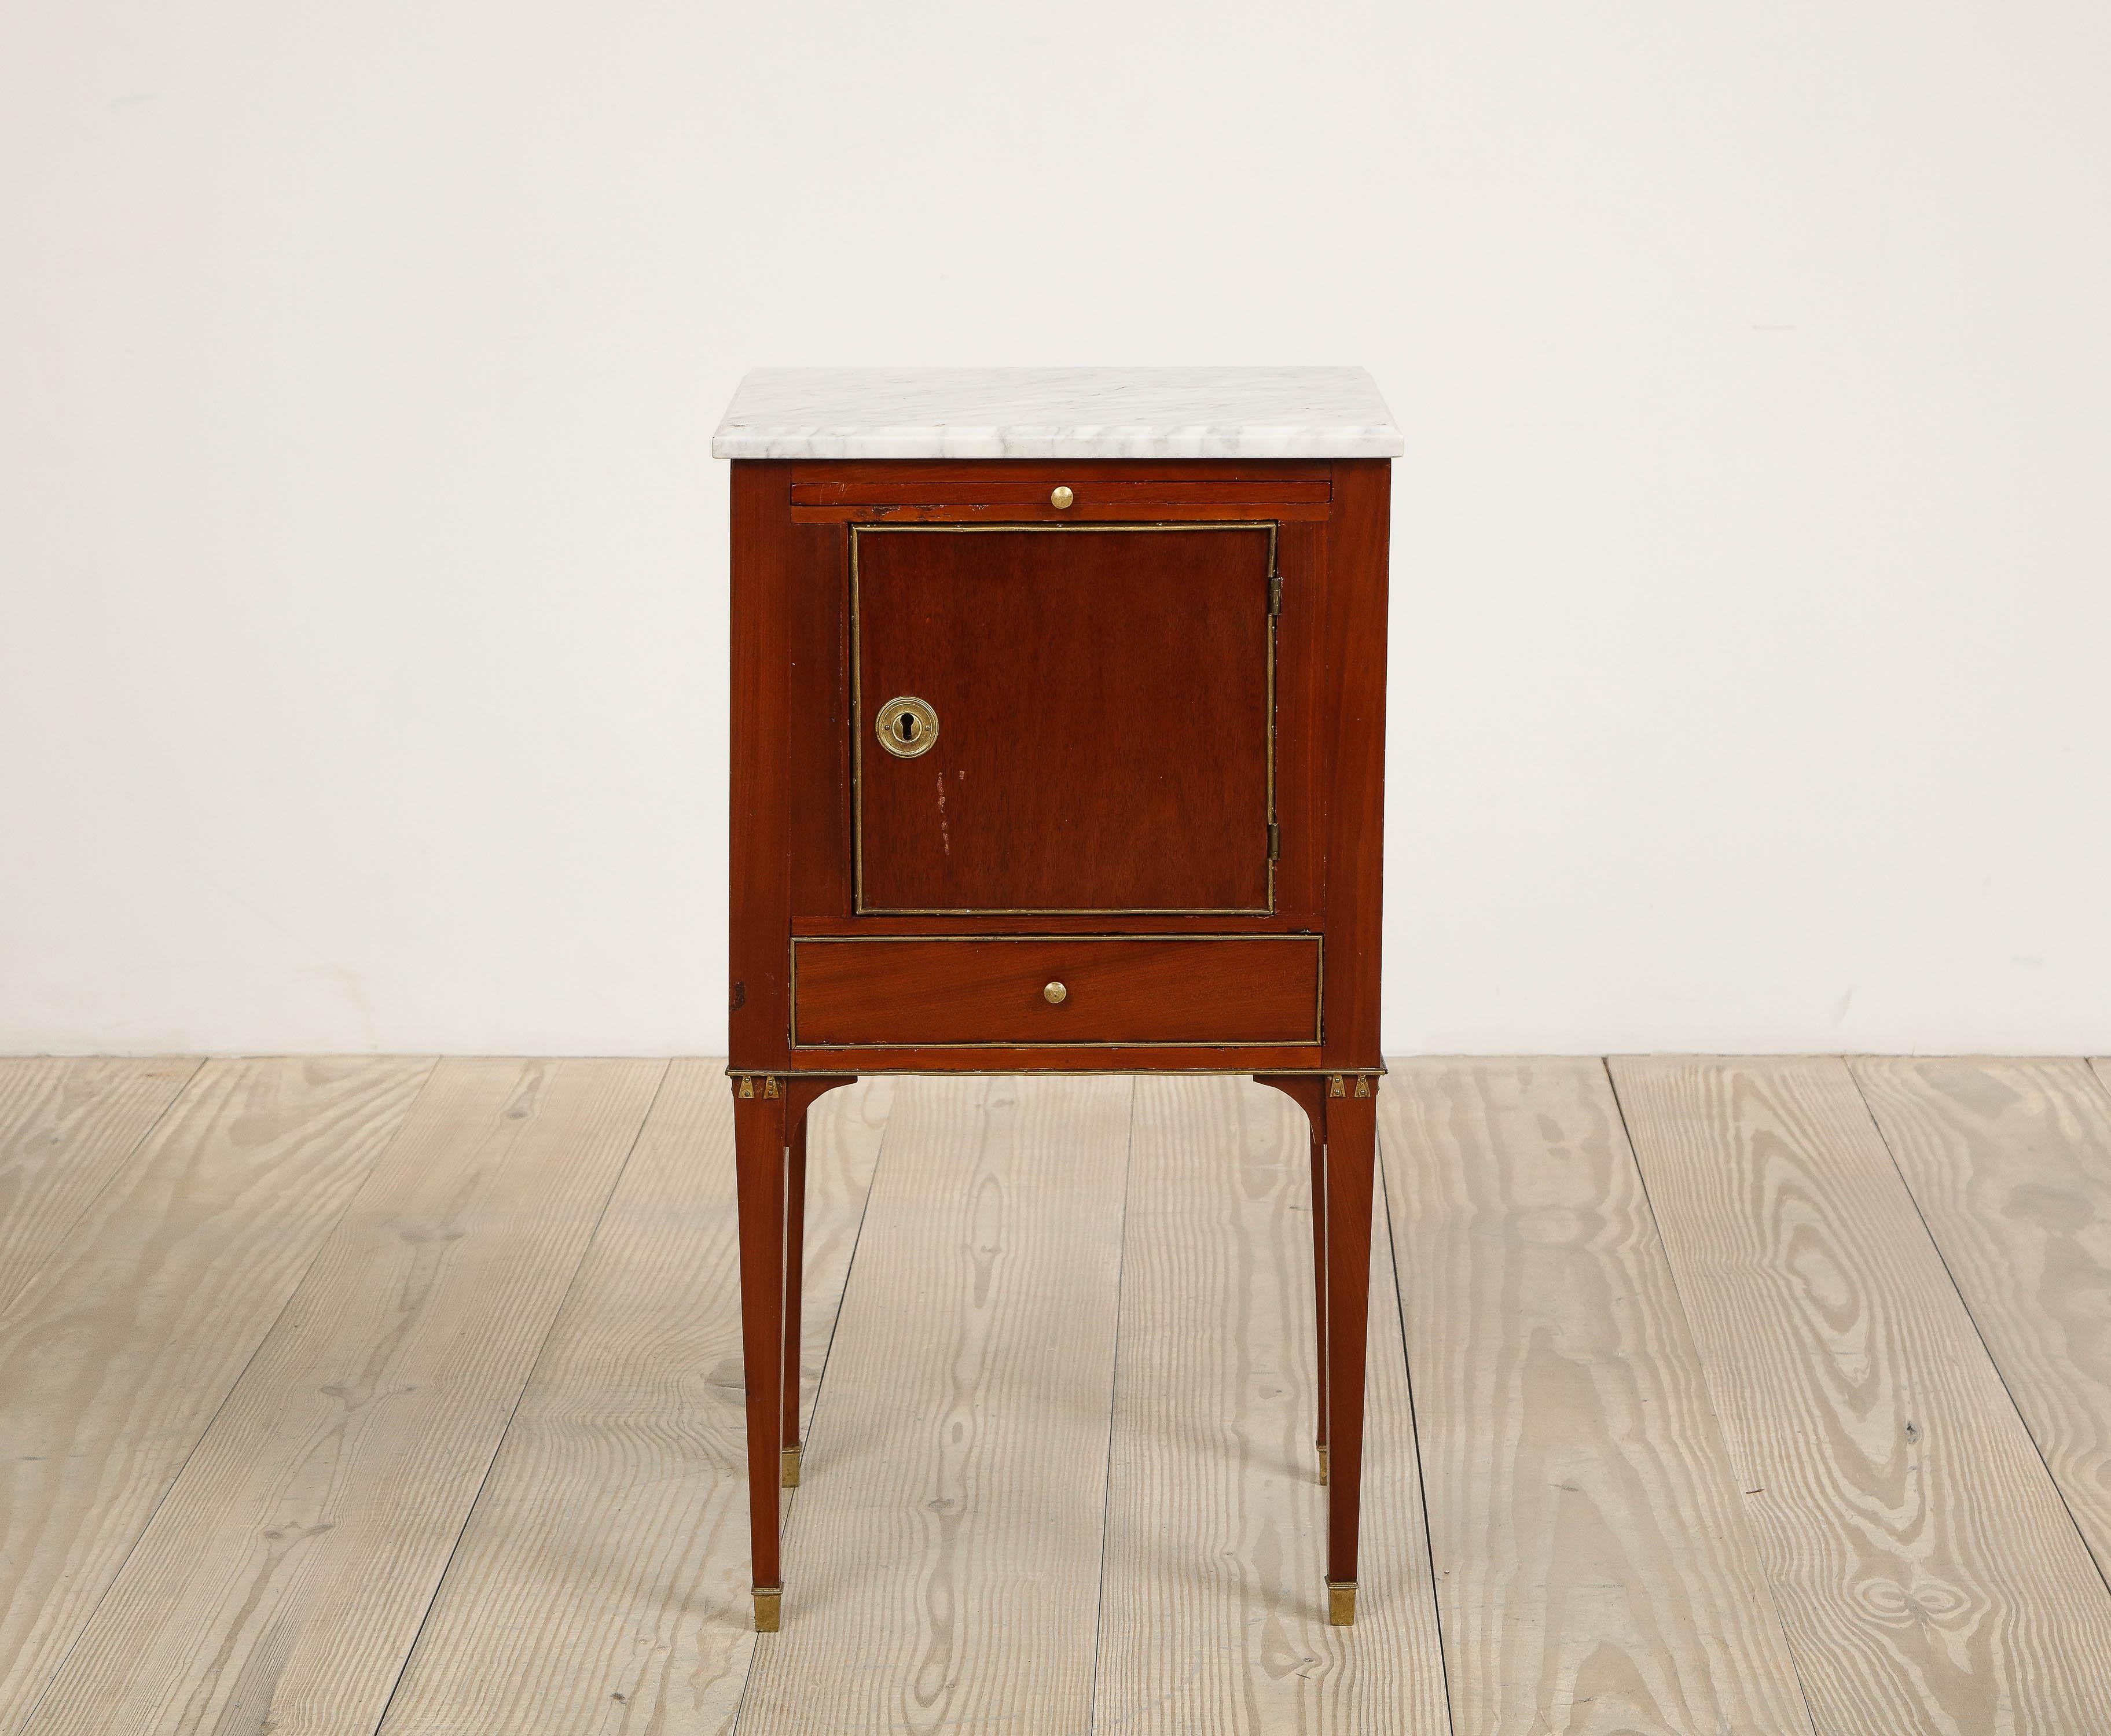 Carrara Marble Swedish Mahogany Gustavian-Style with Marble Top Side Table/Cabinet, circa 1850 For Sale